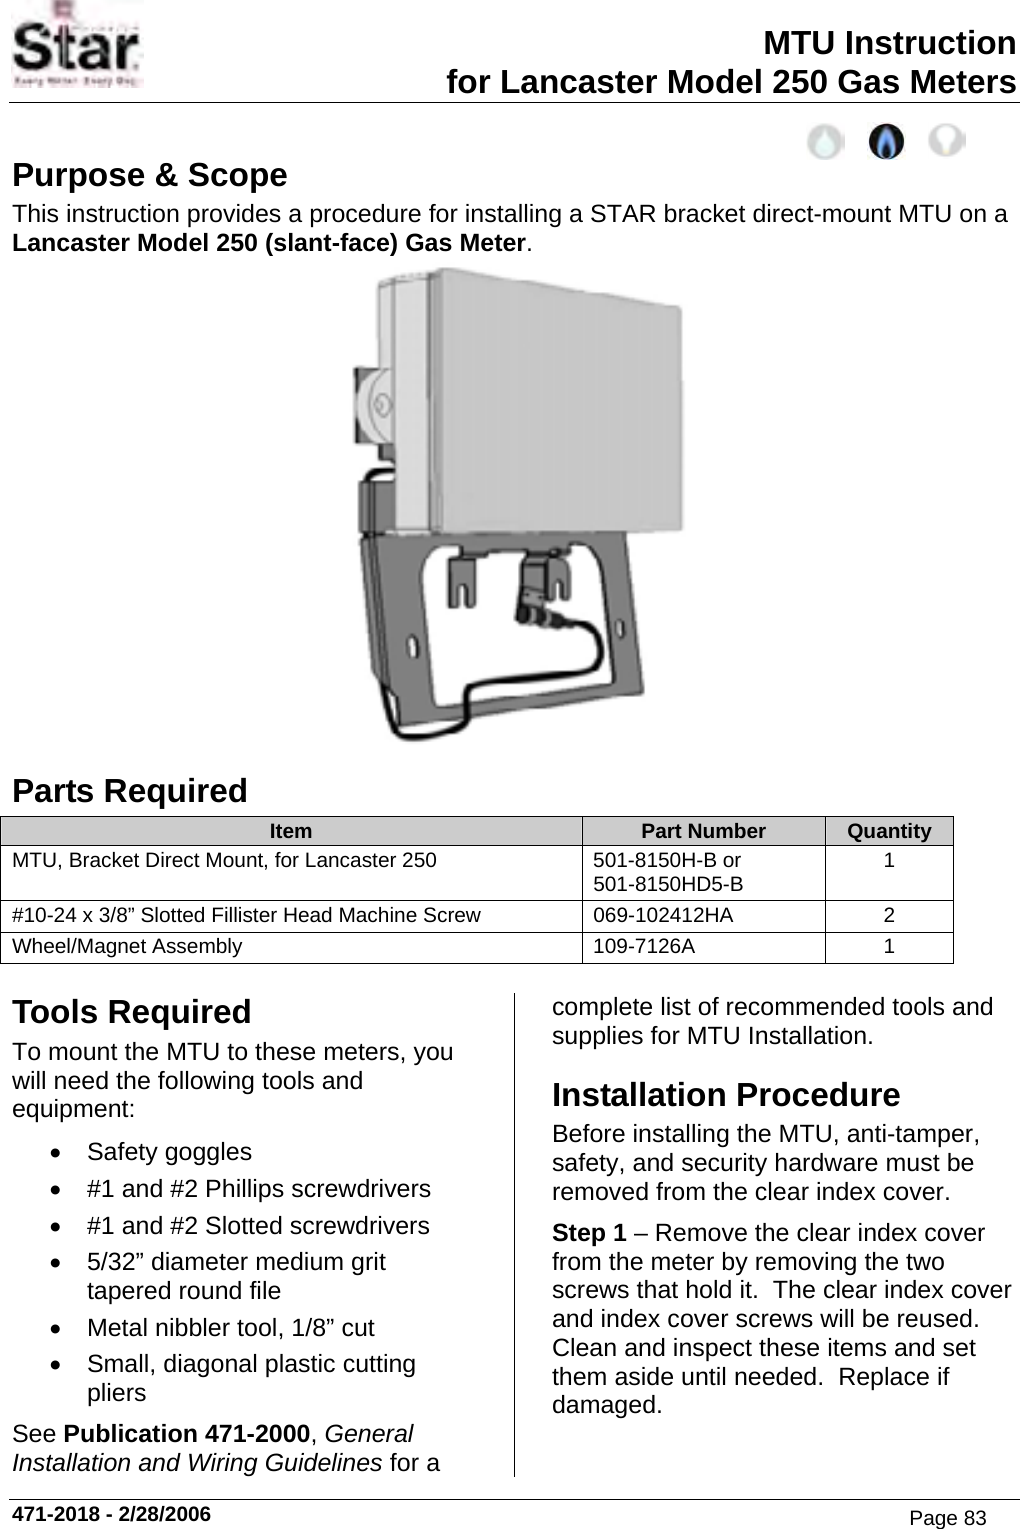 MTU Instruction for Lancaster Model 250 Gas Meters Purpose &amp; Scope This instruction provides a procedure for installing a STAR bracket direct-mount MTU on a Lancaster Model 250 (slant-face) Gas Meter.  Parts Required Item  Part Number  Quantity MTU, Bracket Direct Mount, for Lancaster 250  501-8150H-B or 501-8150HD5-B  1 #10-24 x 3/8” Slotted Fillister Head Machine Screw  069-102412HA  2 Wheel/Magnet Assembly  109-7126A  1  Tools Required To mount the MTU to these meters, you will need the following tools and equipment: • Safety goggles •  #1 and #2 Phillips screwdrivers •  #1 and #2 Slotted screwdrivers •  5/32” diameter medium grit tapered round file •  Metal nibbler tool, 1/8” cut •  Small, diagonal plastic cutting pliers See Publication 471-2000, General Installation and Wiring Guidelines for a complete list of recommended tools and supplies for MTU Installation. Installation Procedure Before installing the MTU, anti-tamper, safety, and security hardware must be removed from the clear index cover. Step 1 – Remove the clear index cover from the meter by removing the two screws that hold it.  The clear index cover and index cover screws will be reused.  Clean and inspect these items and set them aside until needed.  Replace if damaged. 471-2018 - 2/28/2006 Page 83